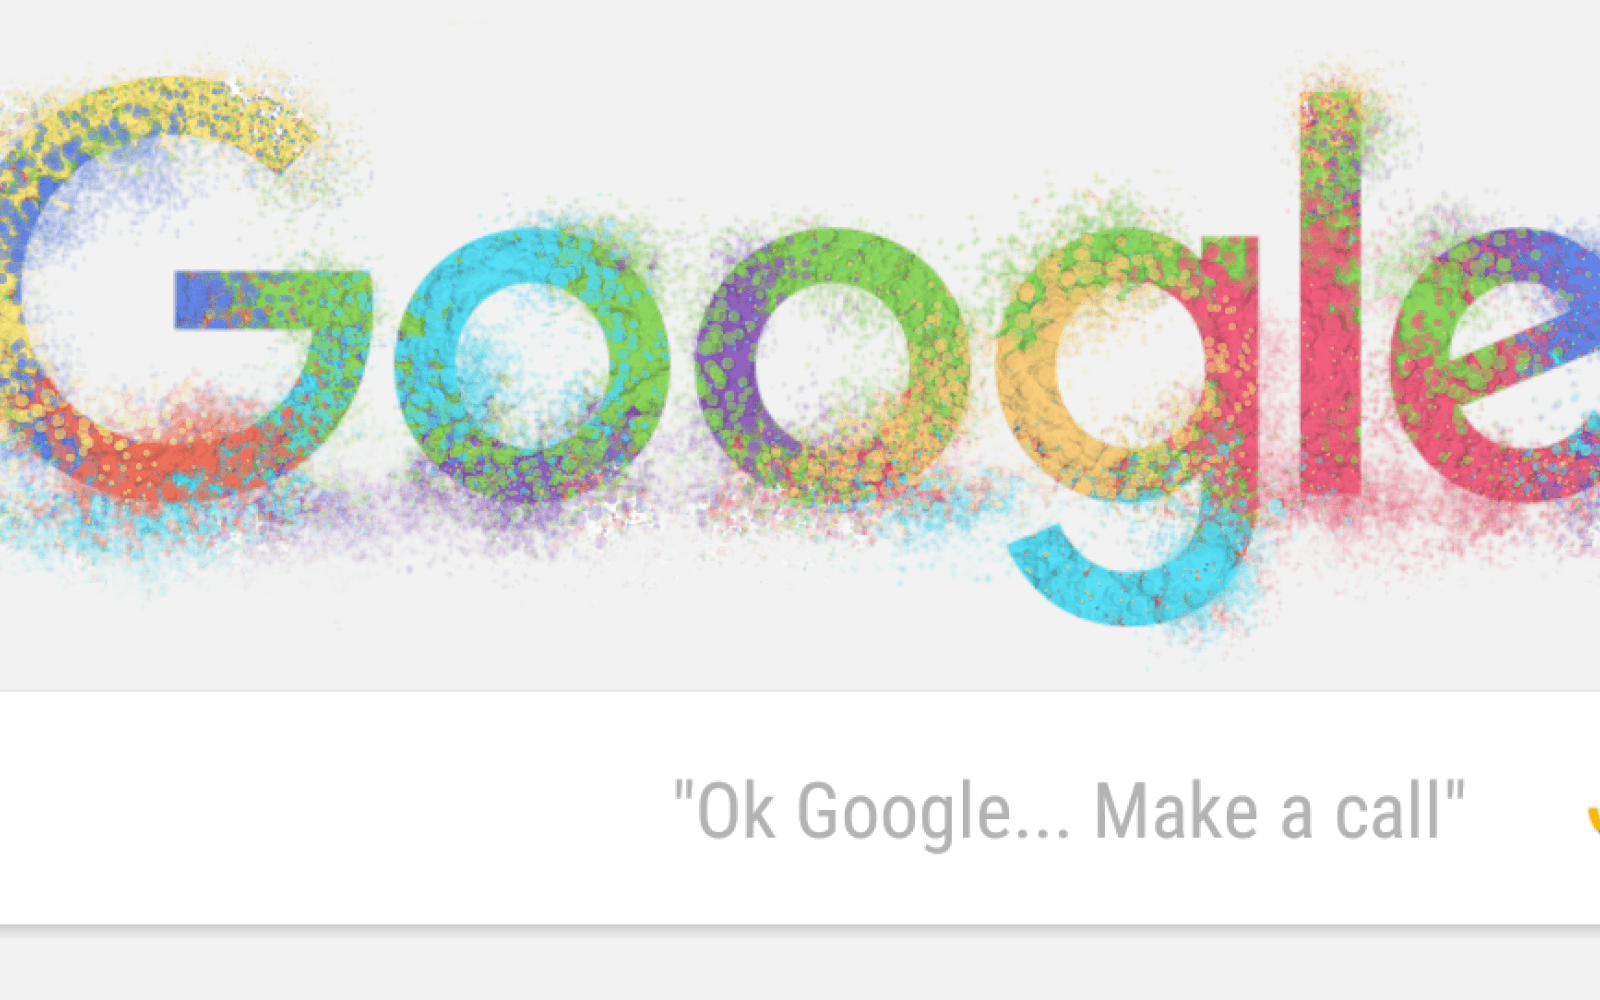 Updated Google Logo - Updated Google app lets users make a custom colored logo, adds new ...